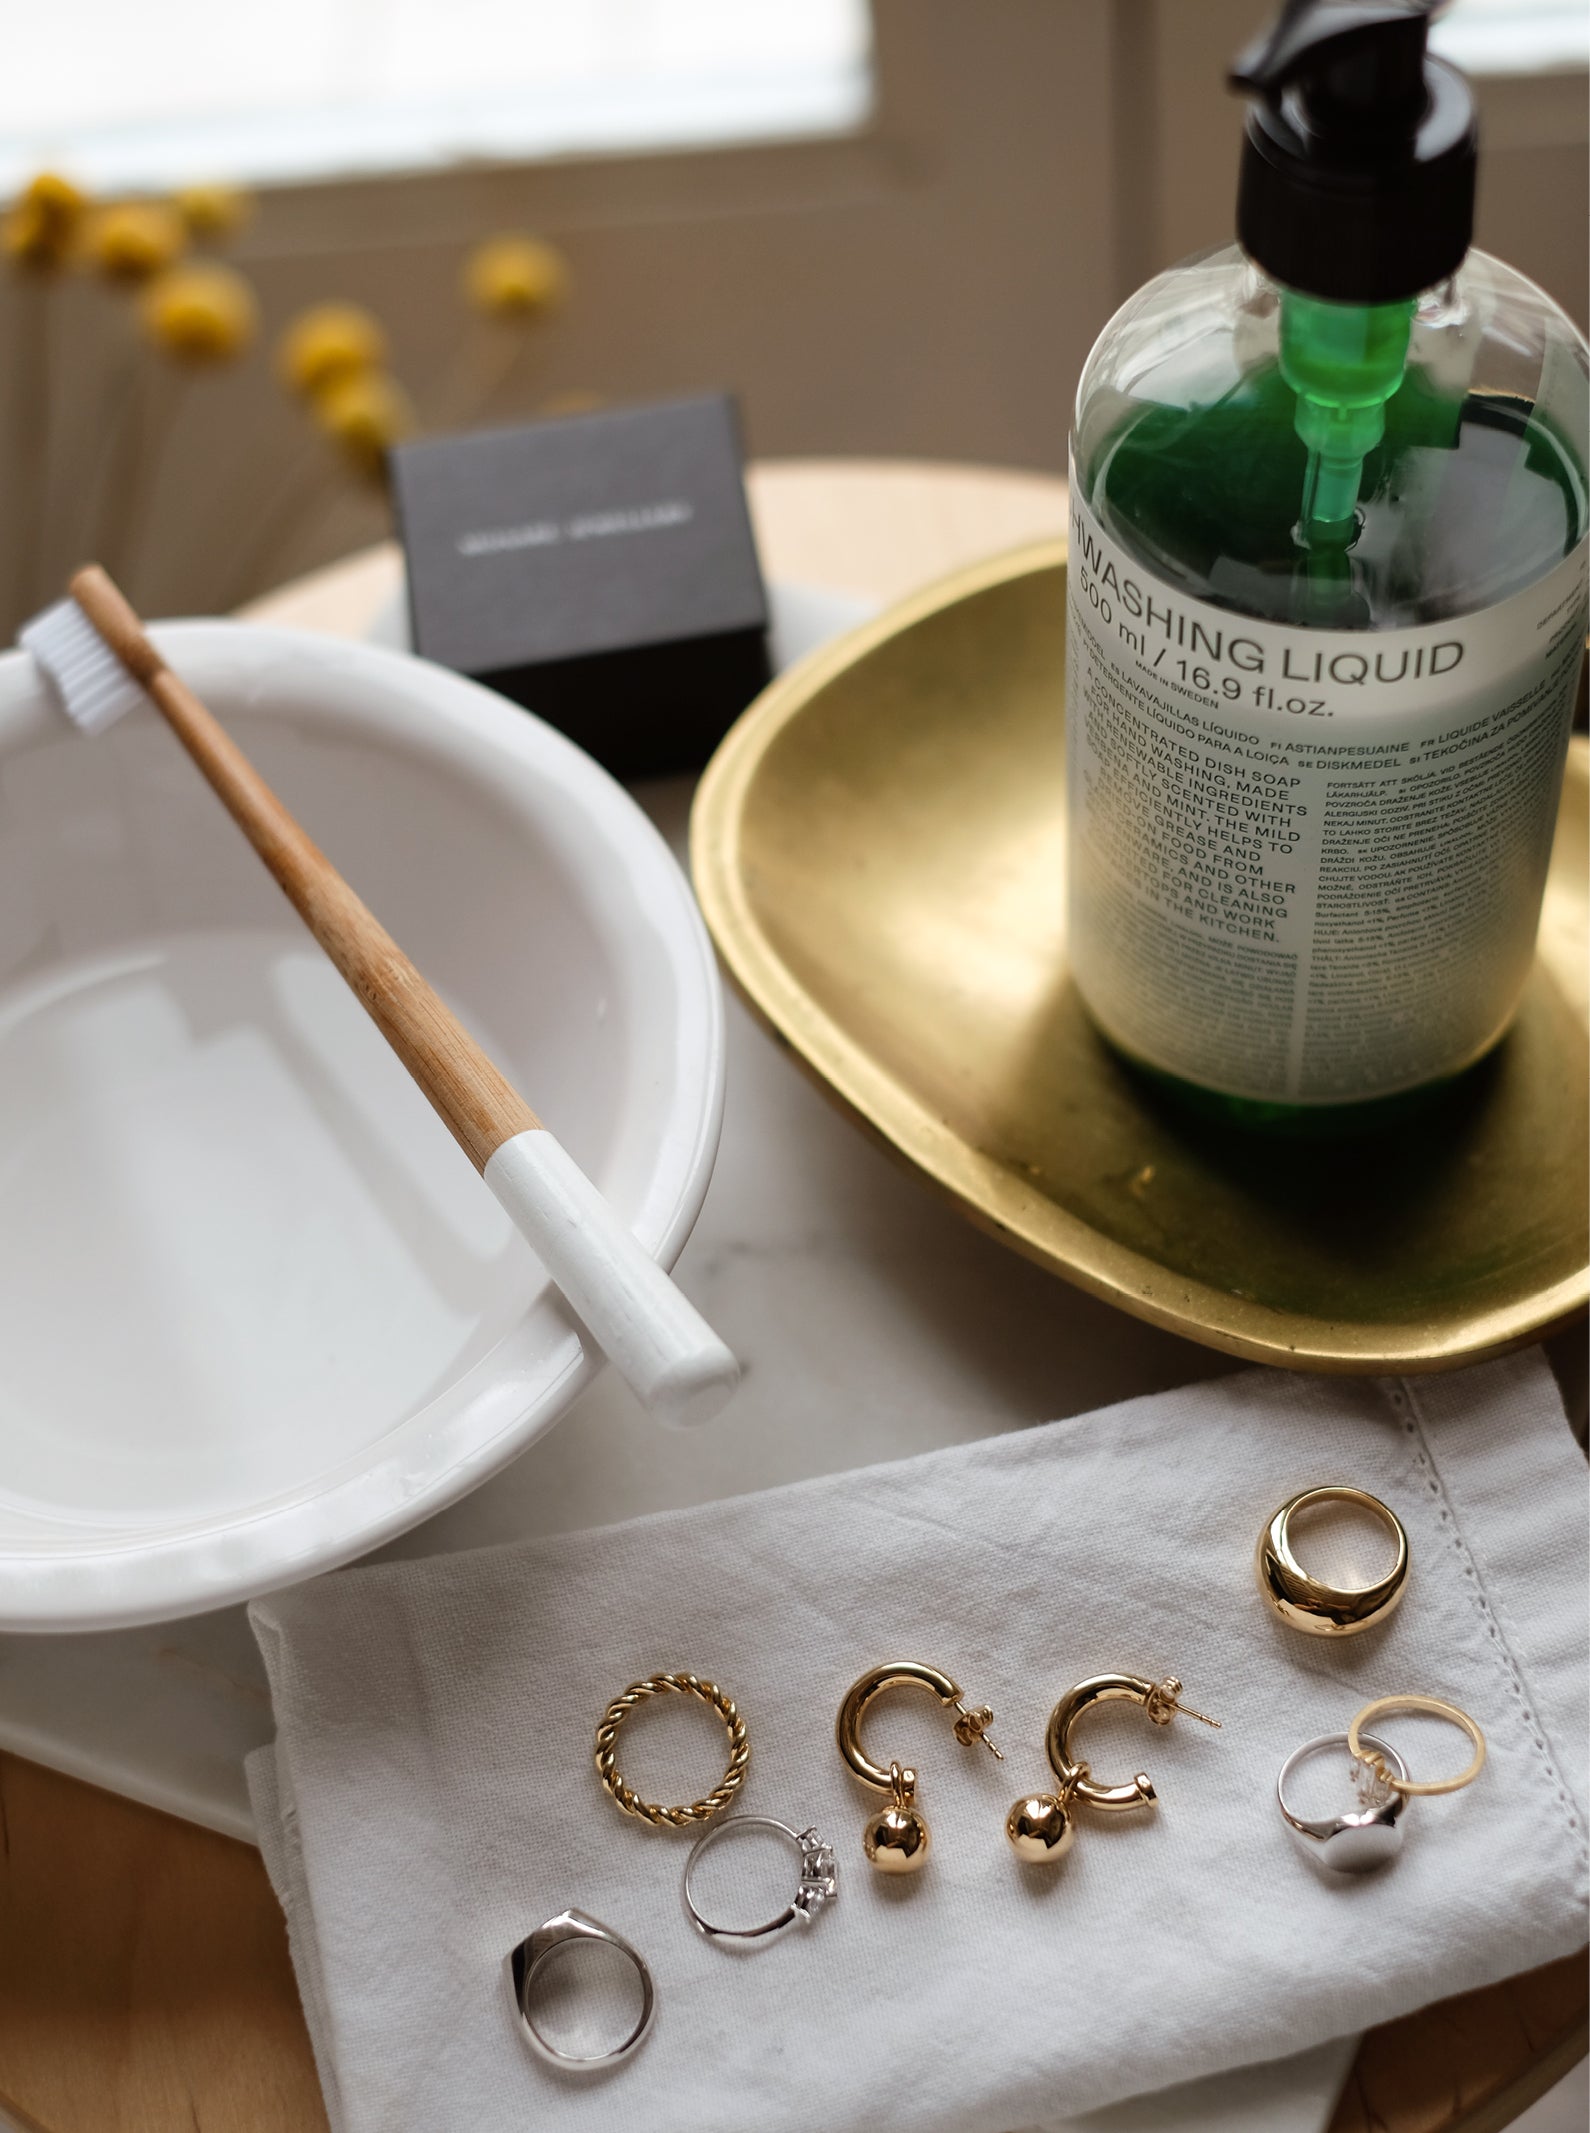 How to clean your jewellery at home